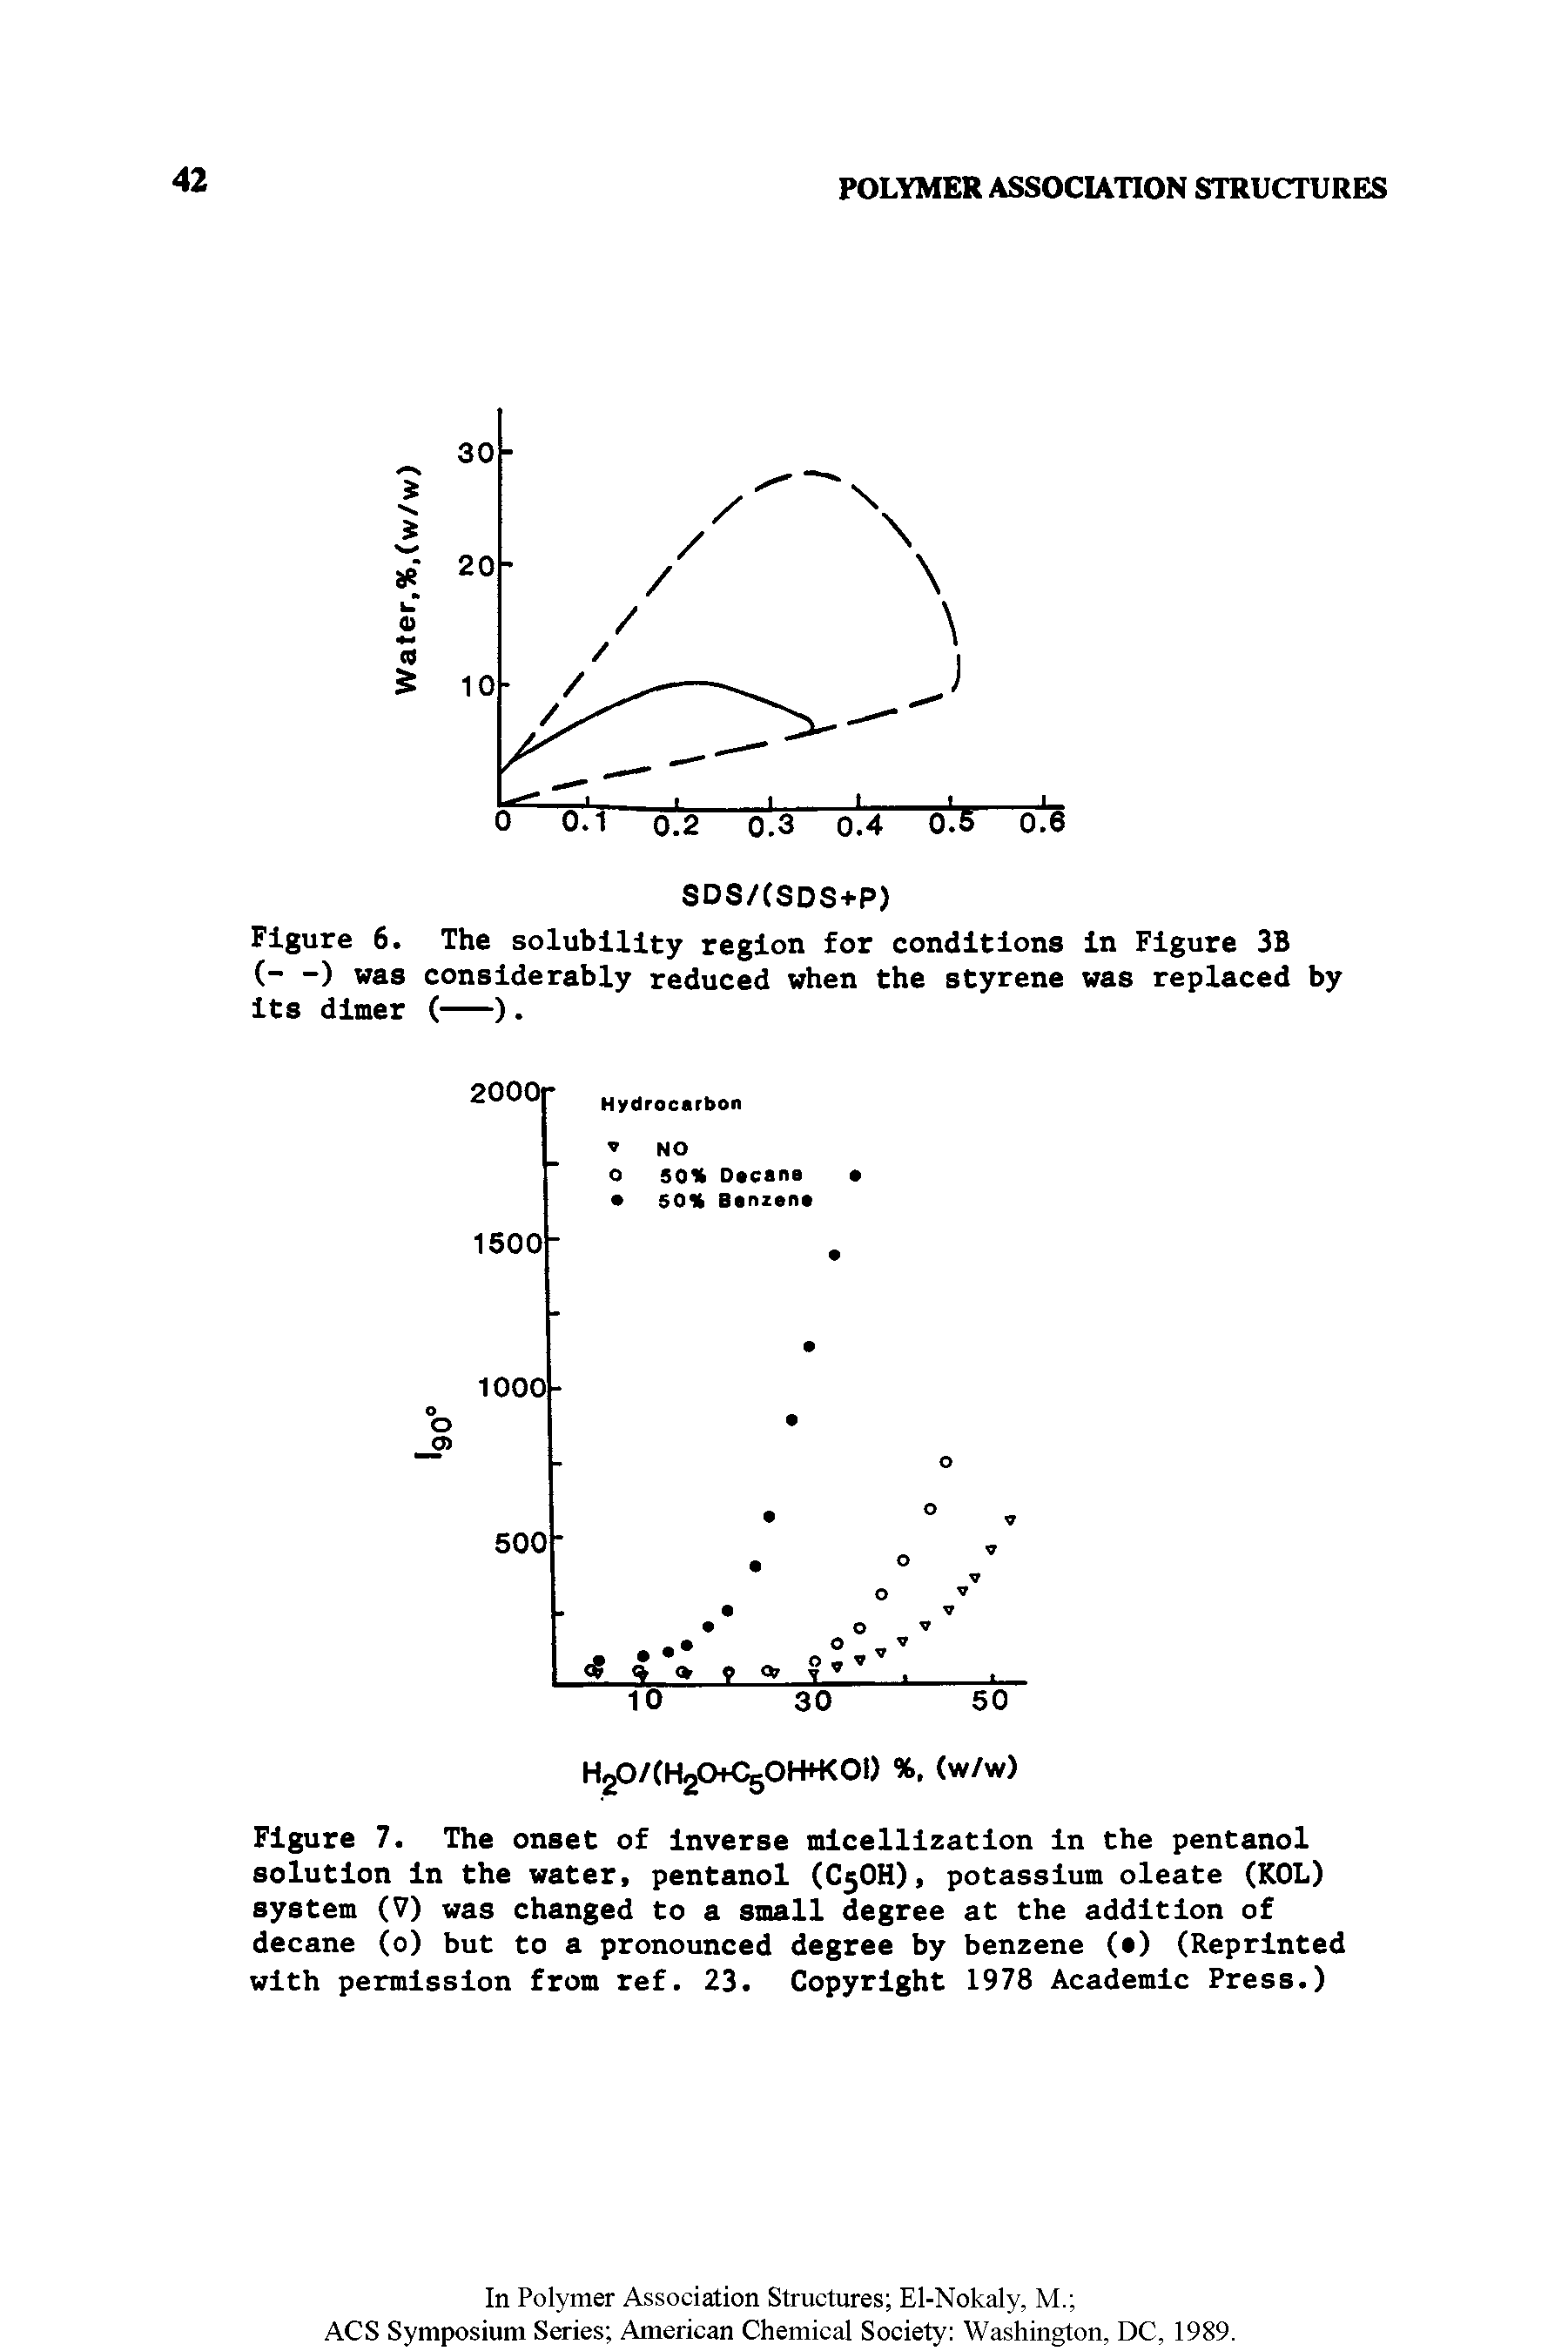 Figure 6. The solubility region for conditions in Figure 3B (- -) was considerably reduced when the styrene was replaced by its dimer (---).